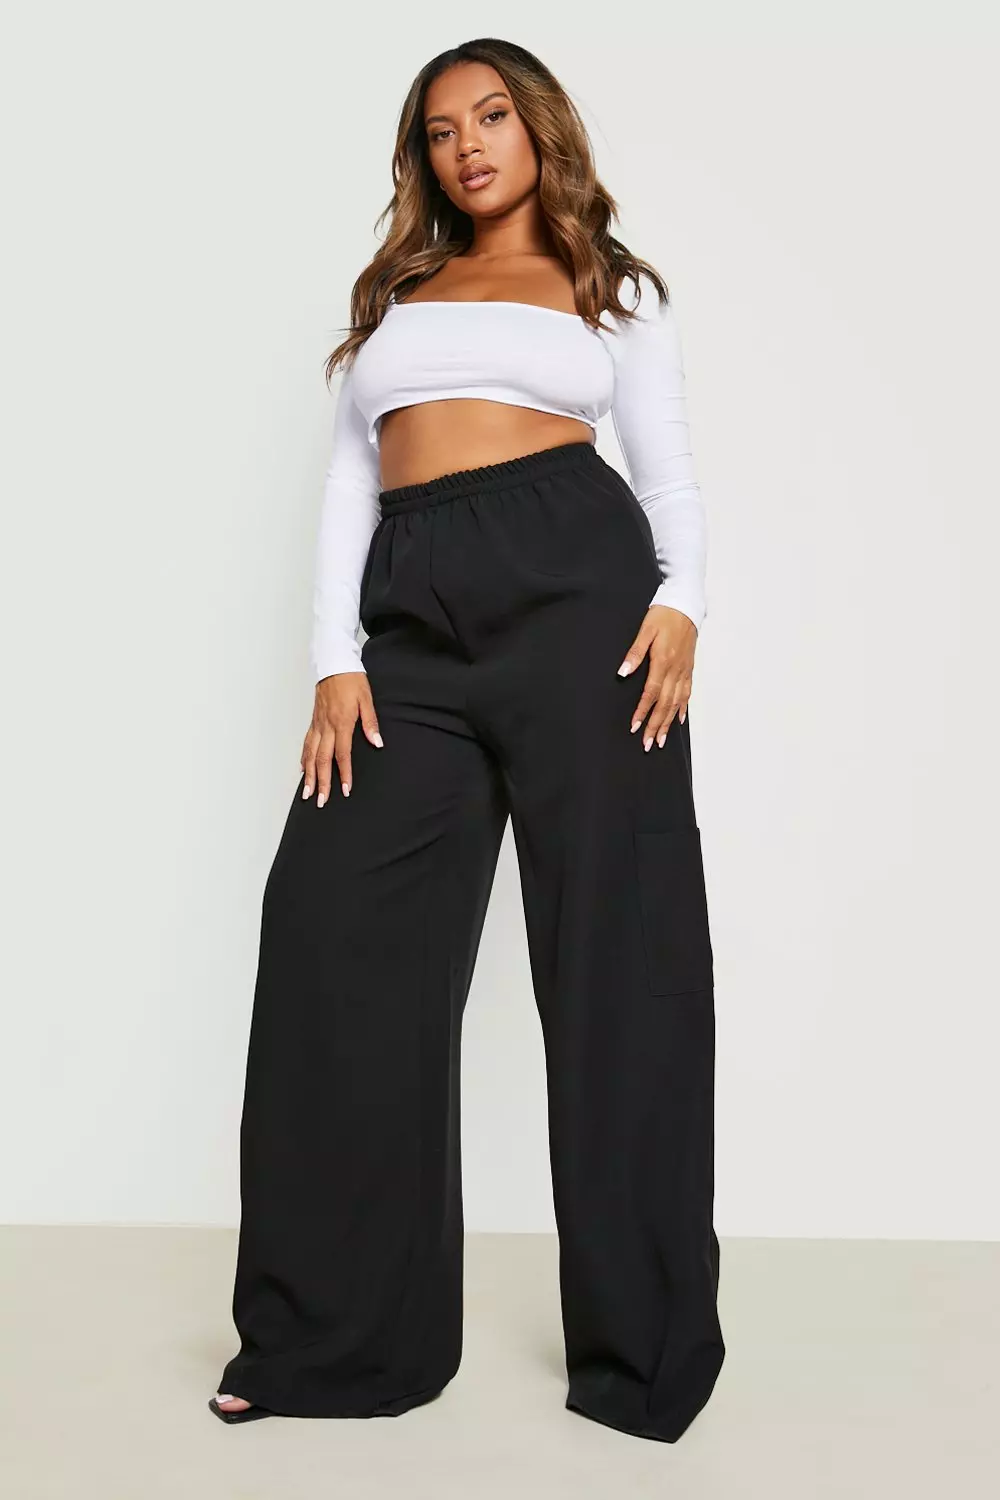 Plus Size Black Wide Leg Trousers Elasticated Waistband With Pockets